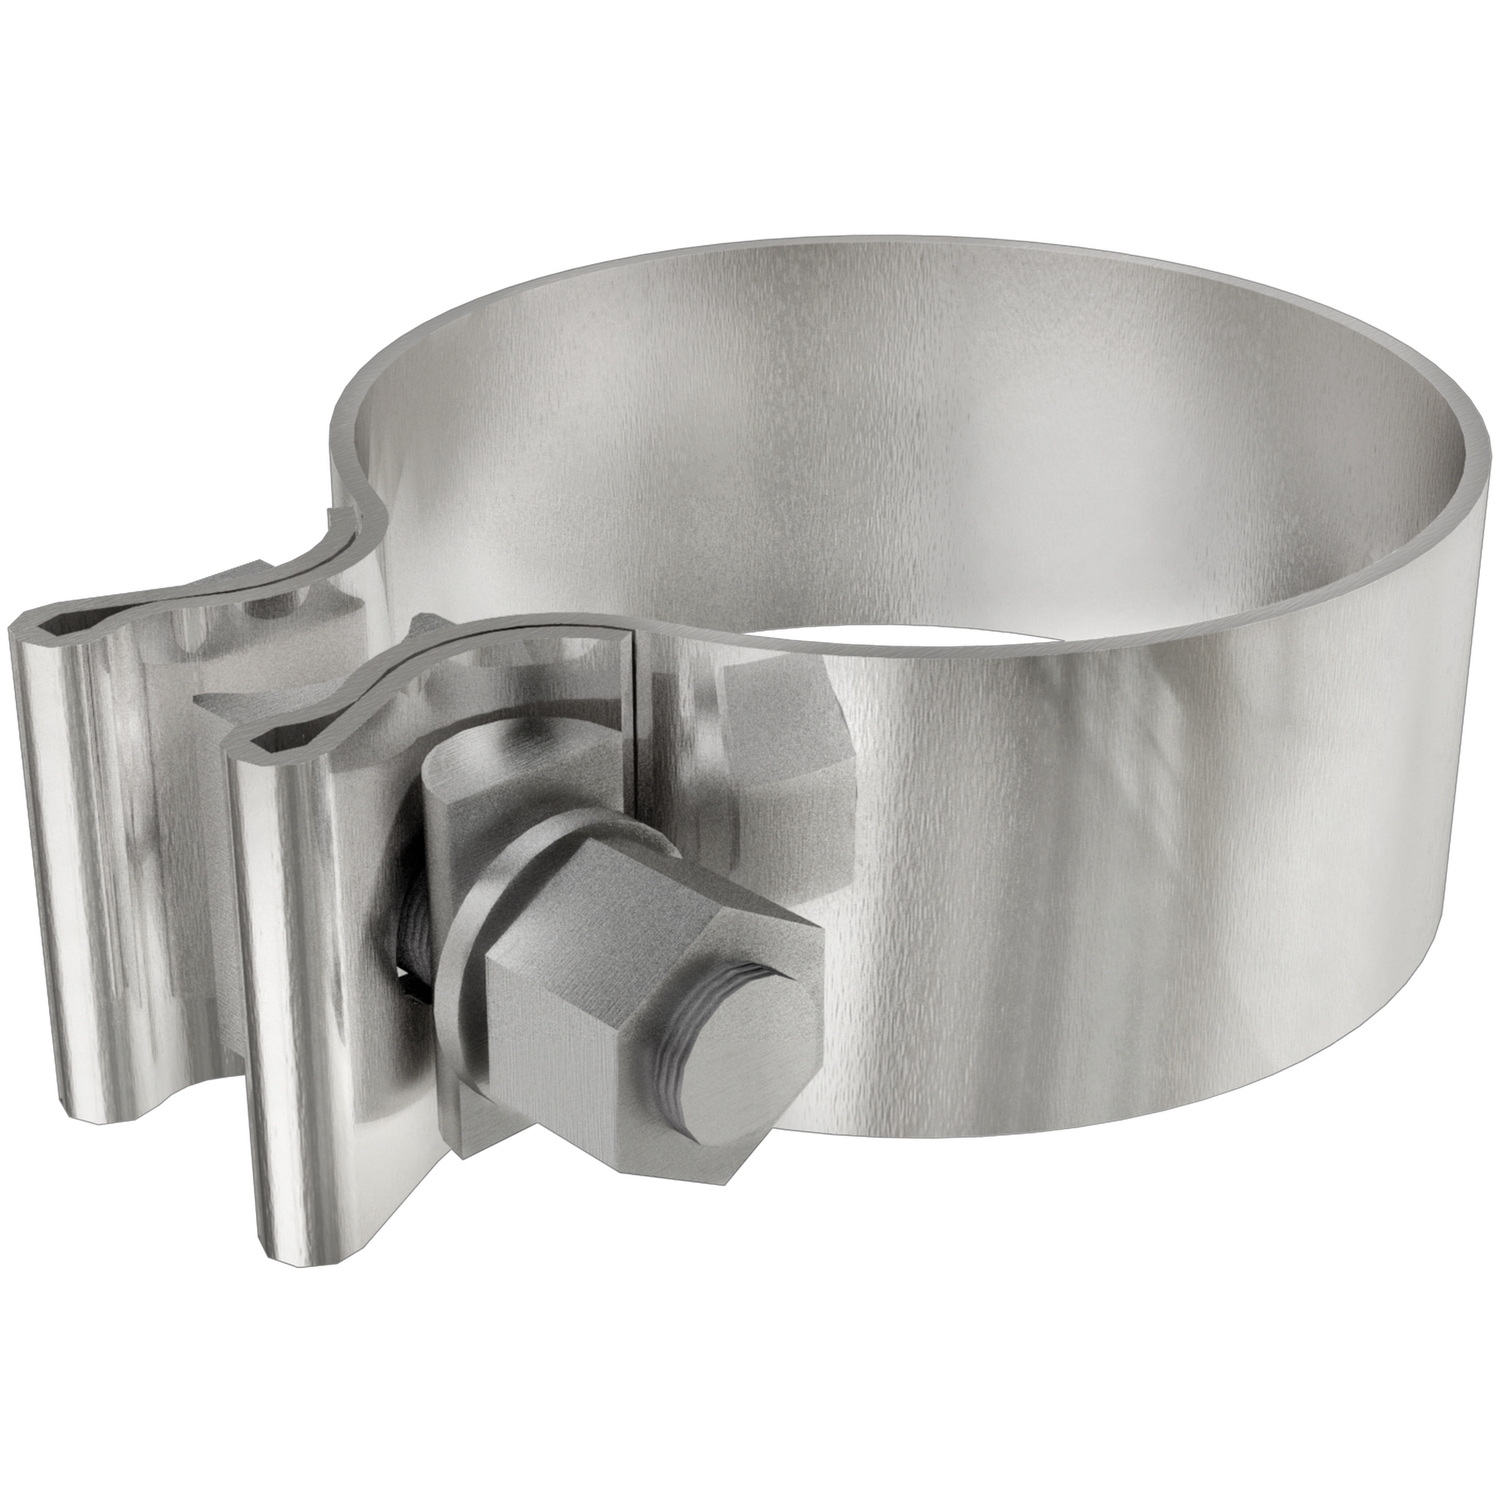 AccuSeal Stainless Steel Exhaust Band Clamps Clamp Diameter: 4"